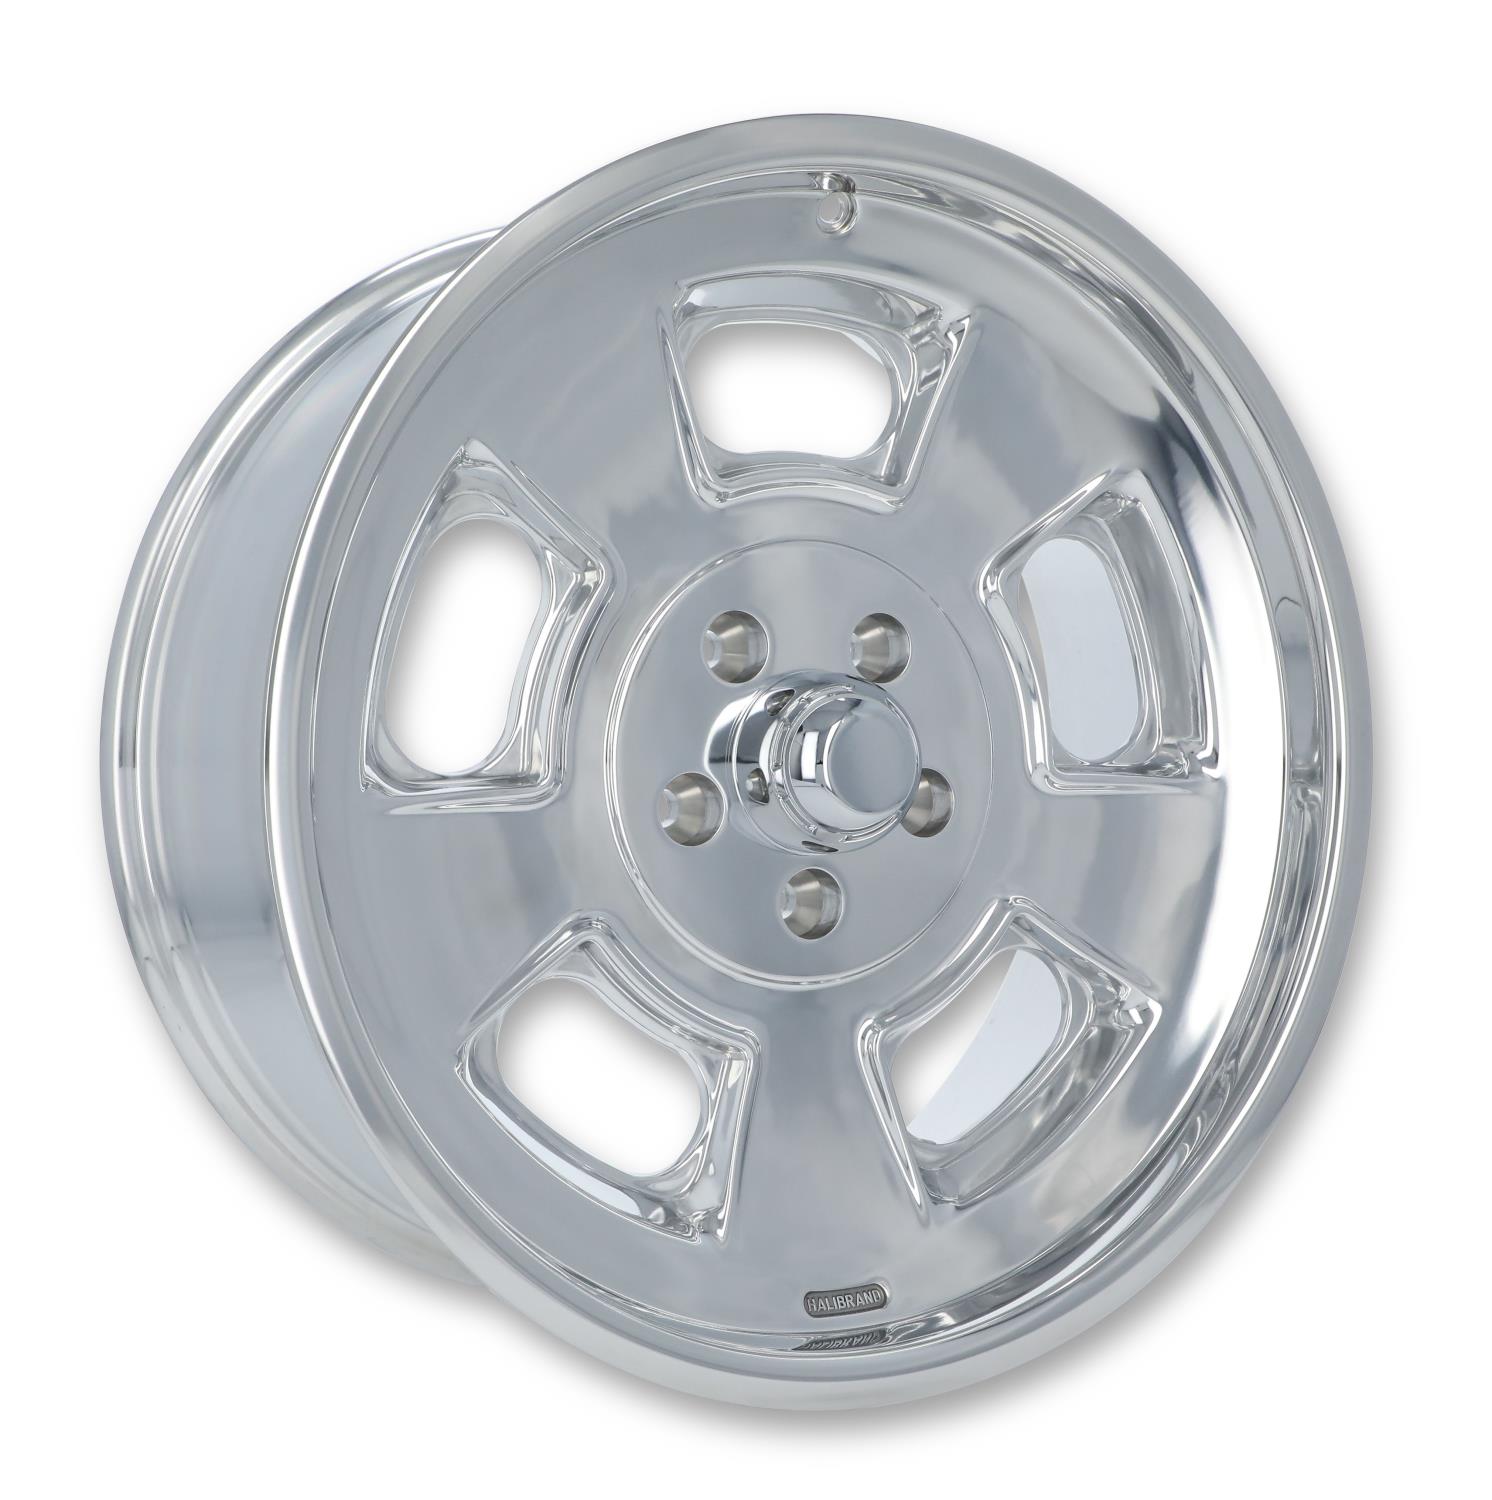 Sprint Front Wheel, Size: 20x8.5", Bolt Pattern: 5x5", Backspace: 5.25" [Polished - No Clearcoat]